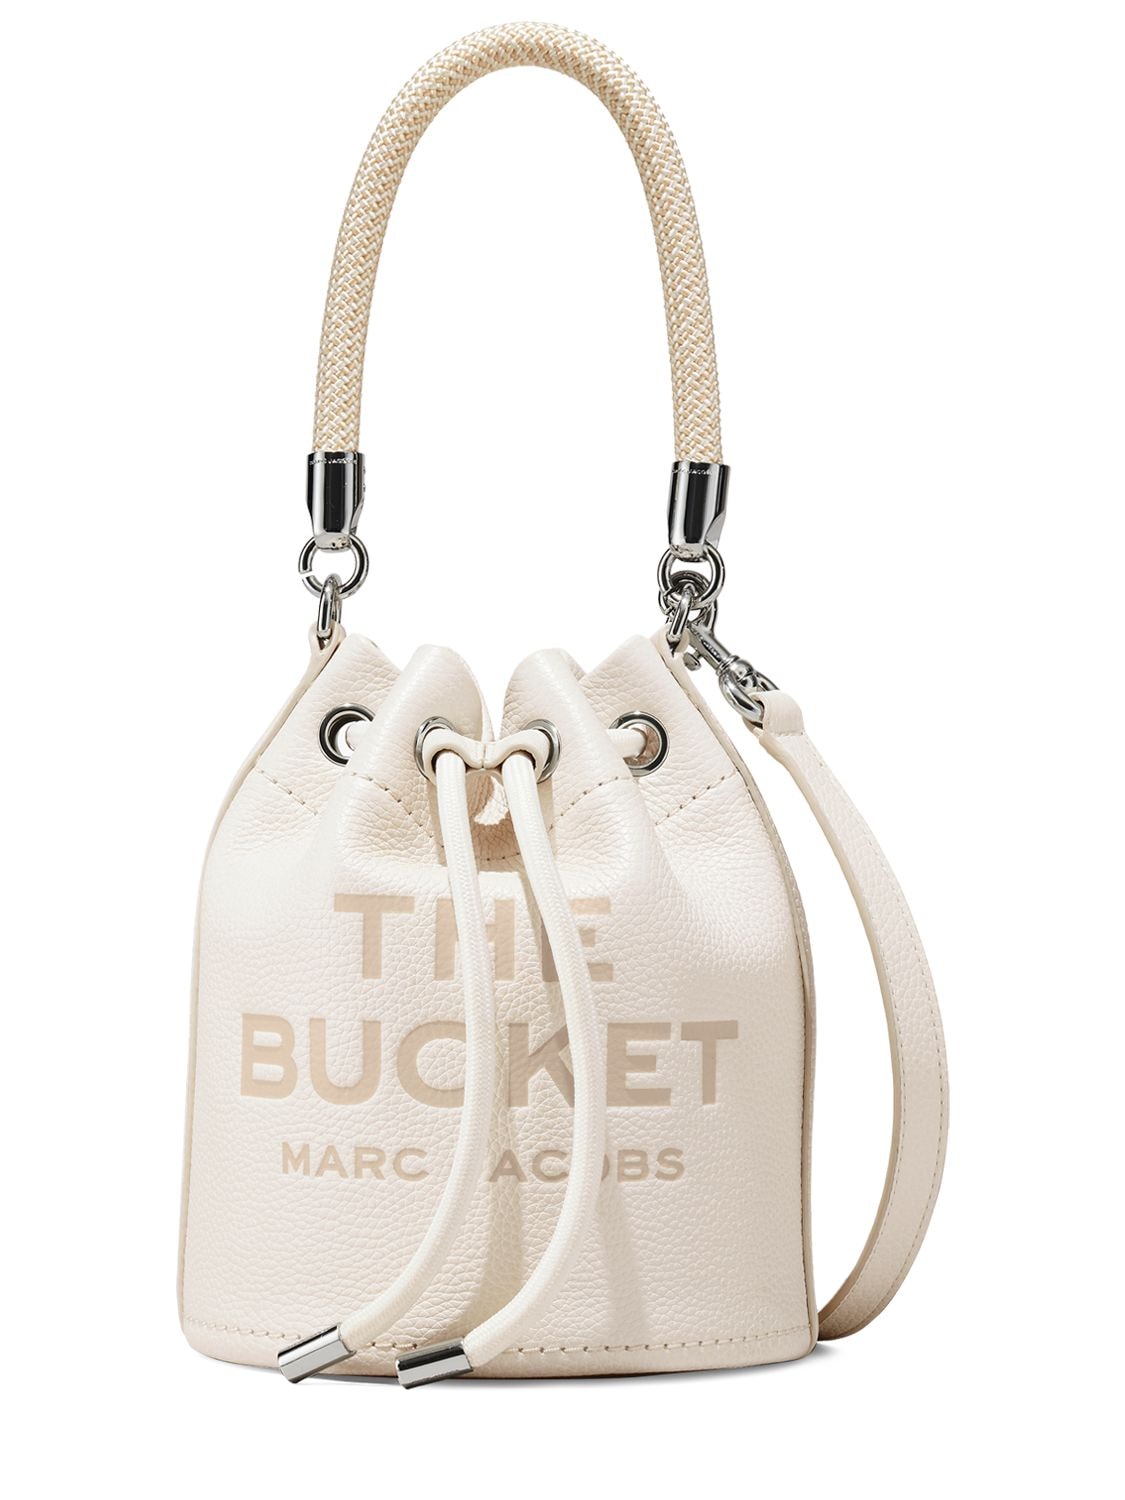 Marc Jacobs The Bucket Leather Bag In Cotton